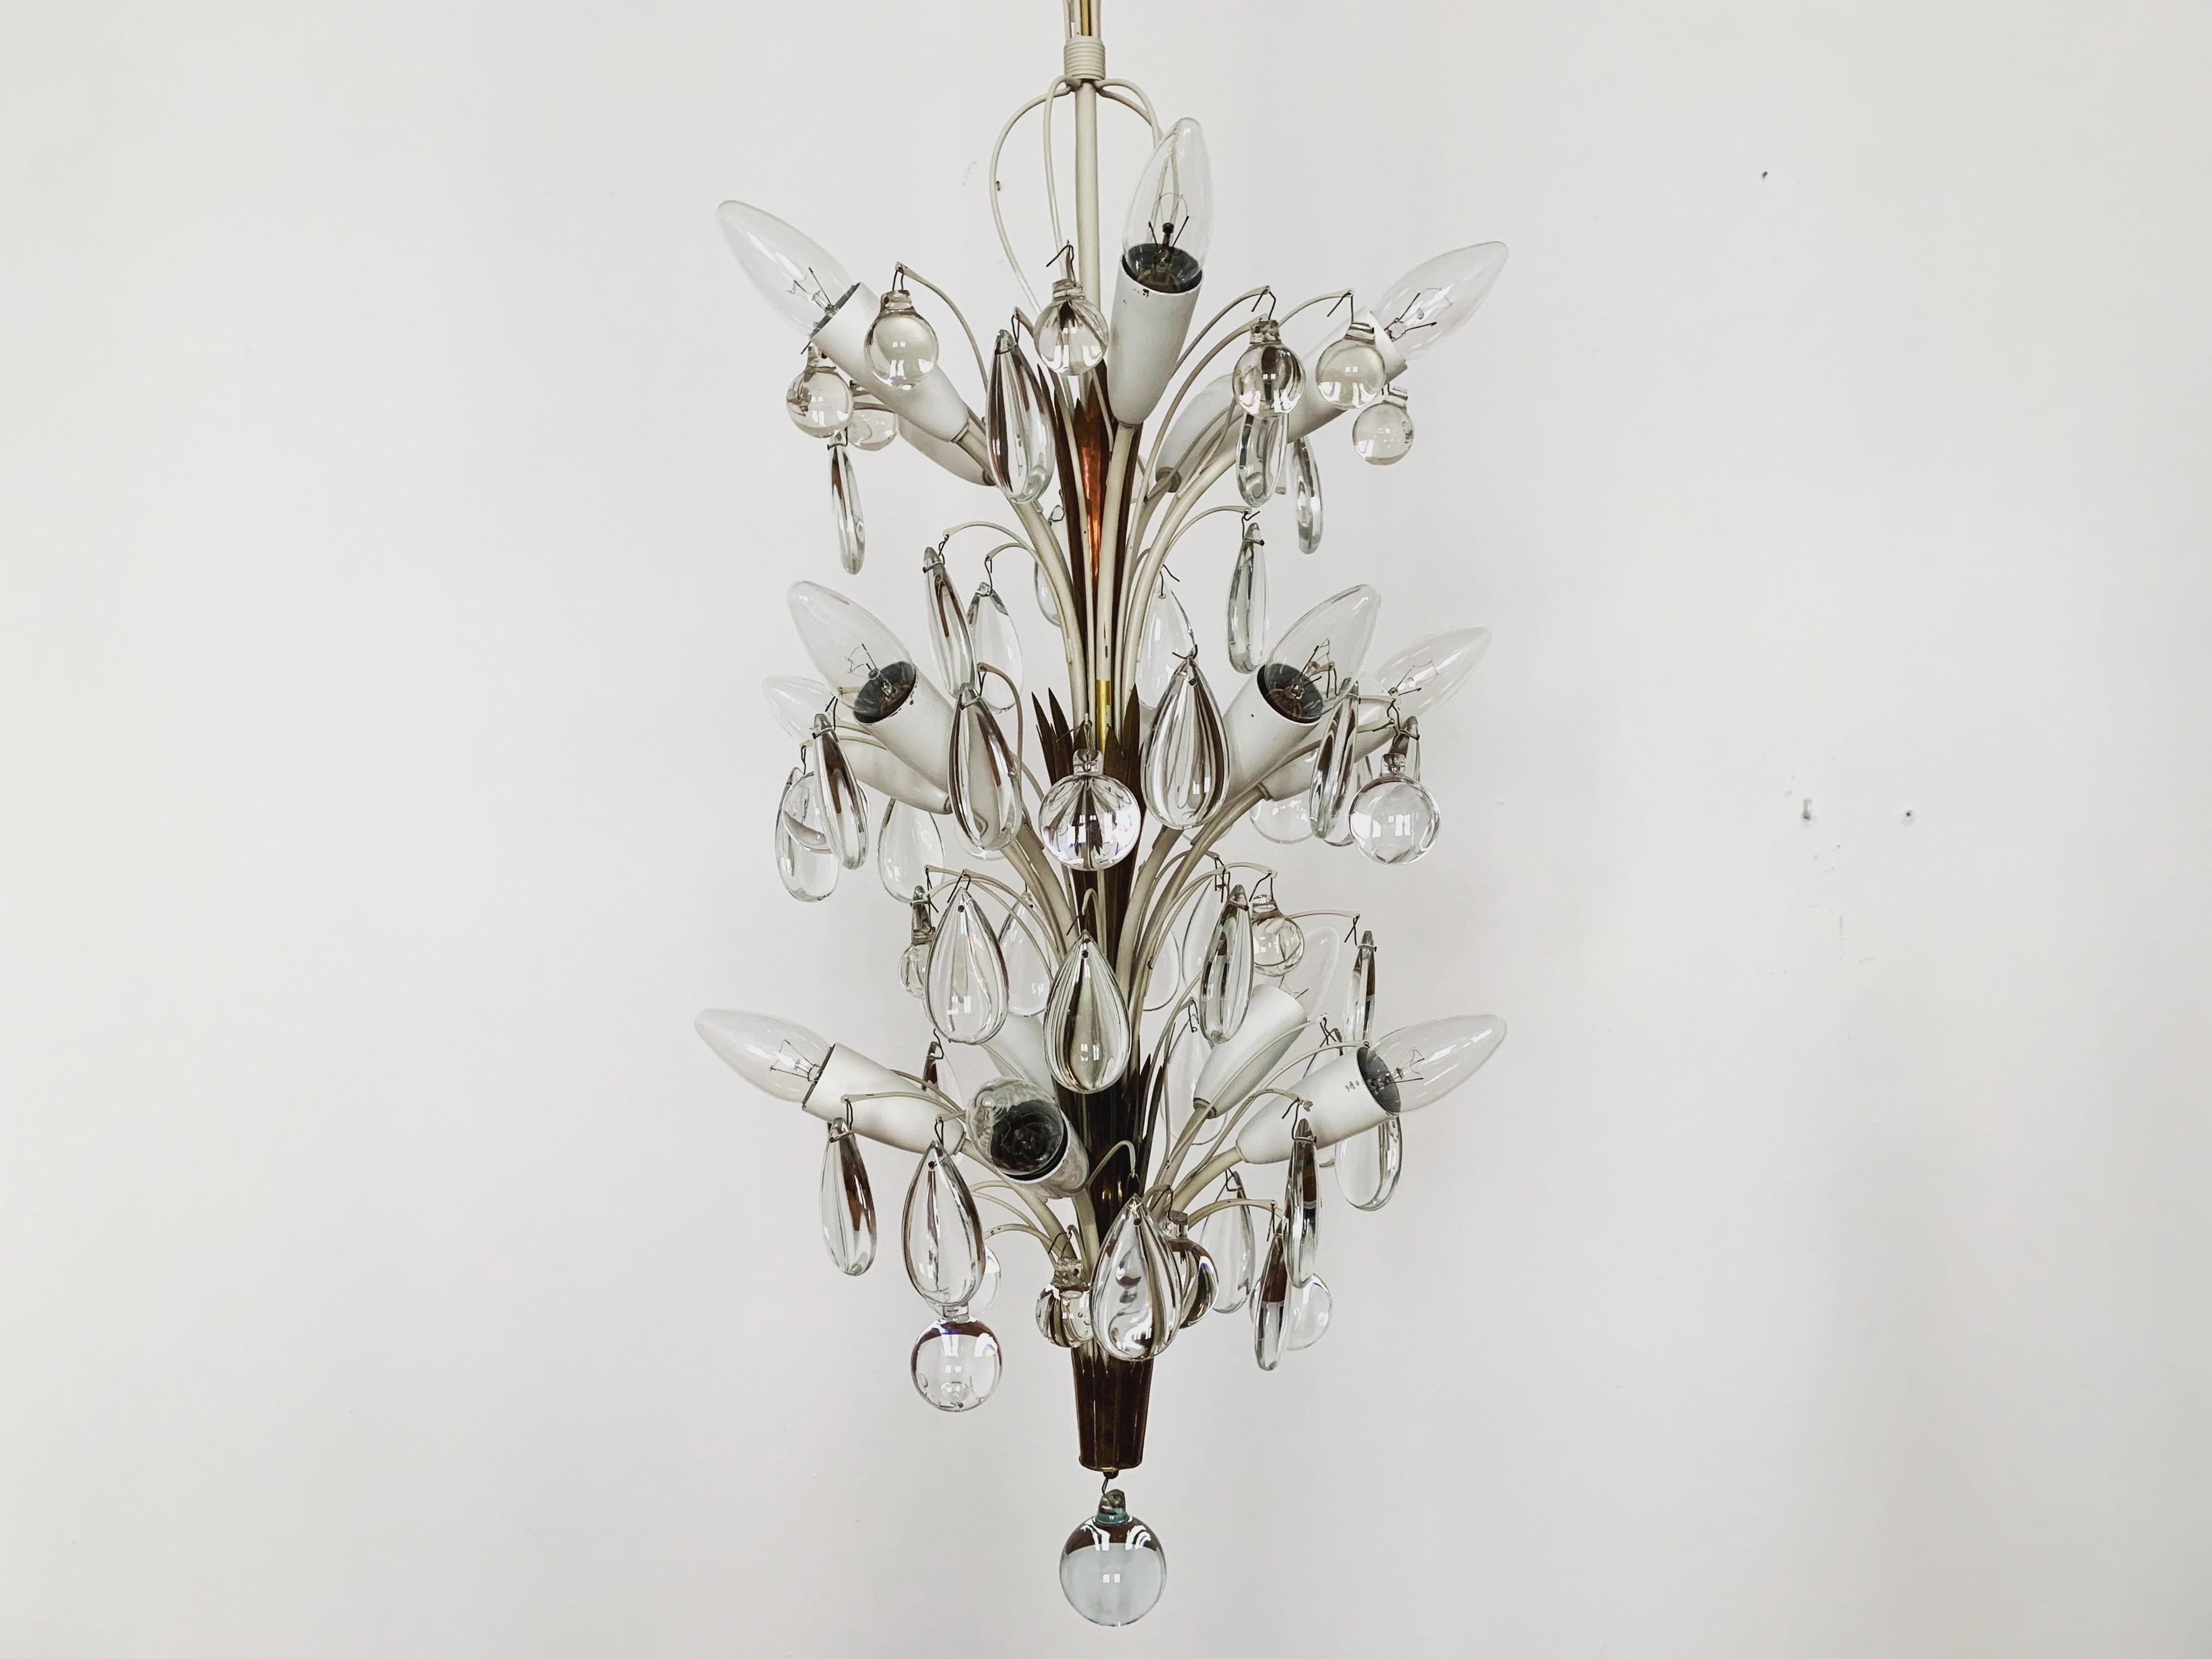 Extremely beautiful chandelier from the 1950s.
The high-quality workmanship and the very noble material impress at first sight.
Exceptionally beautiful design.
The sparkling stones spread a sensational light.

Manufacturer: Vereinigte Werkstätten